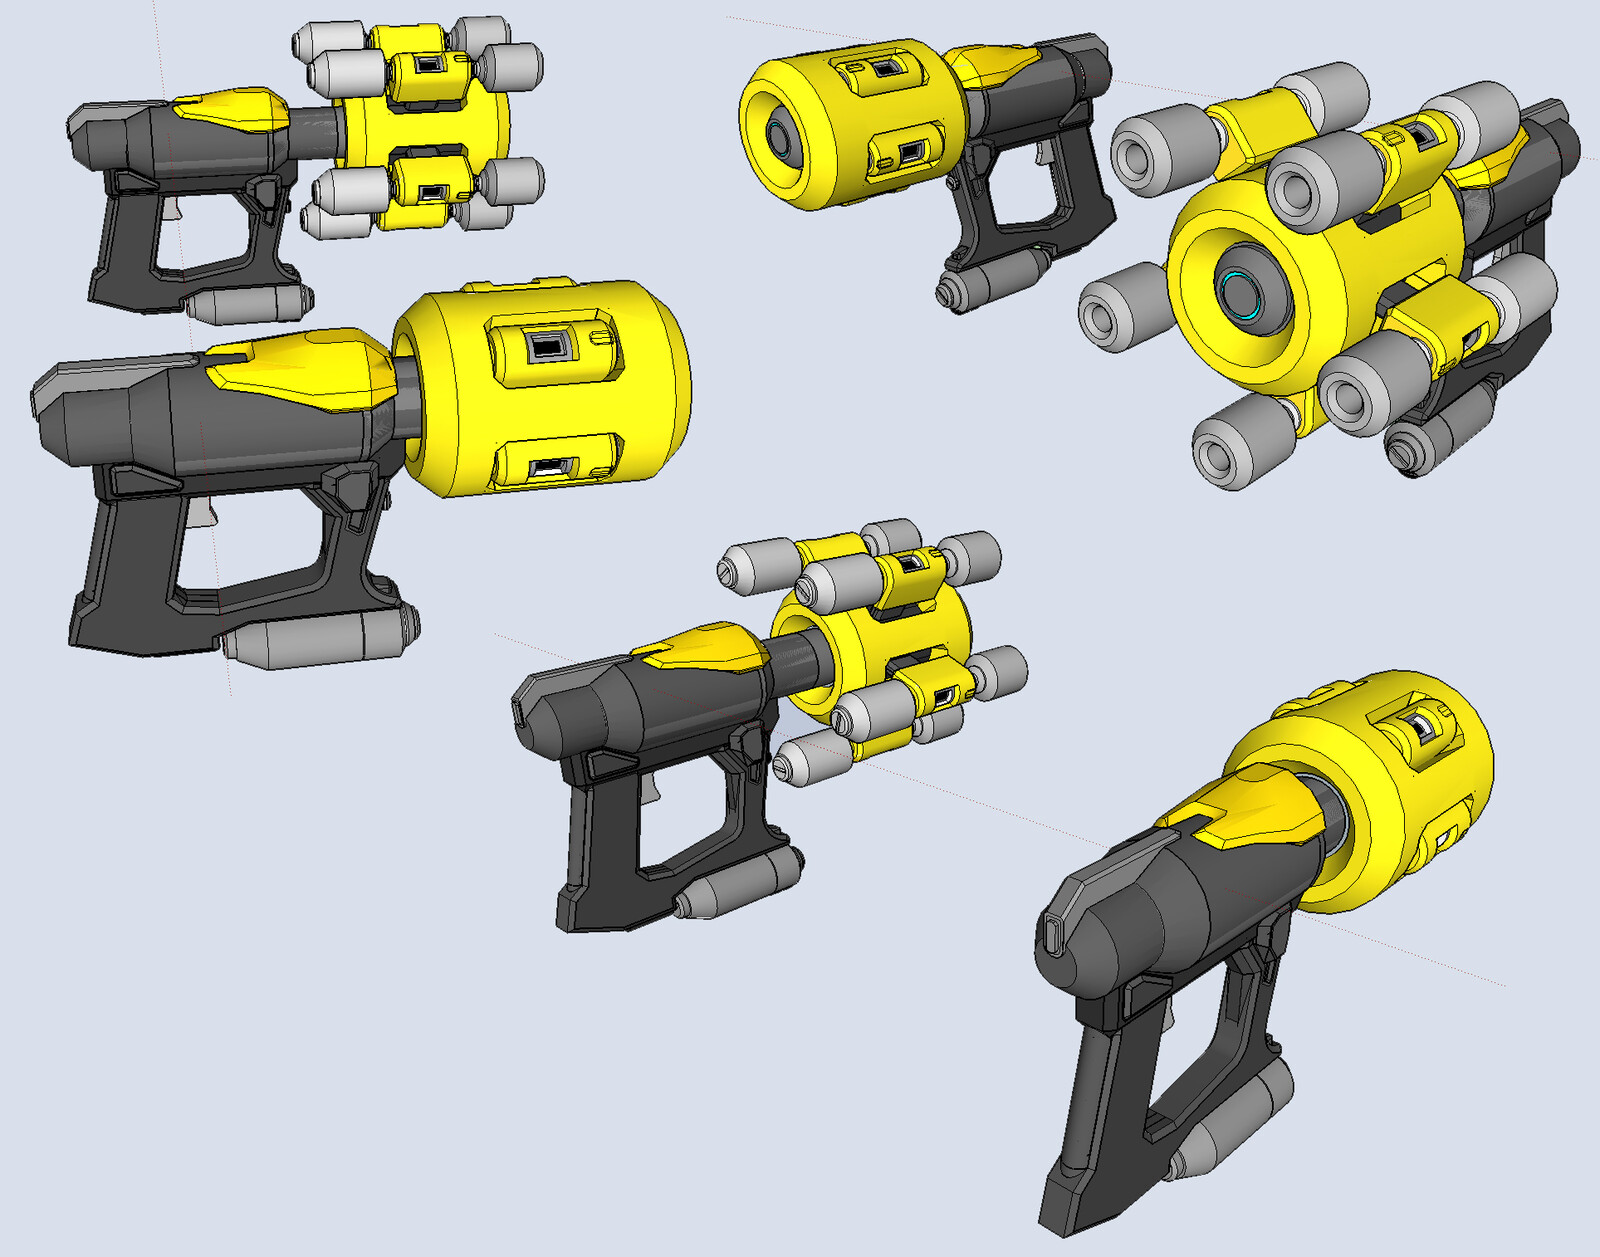 Sumo weapon development.  the gun has a retractable turret so it can be stored on the body.  